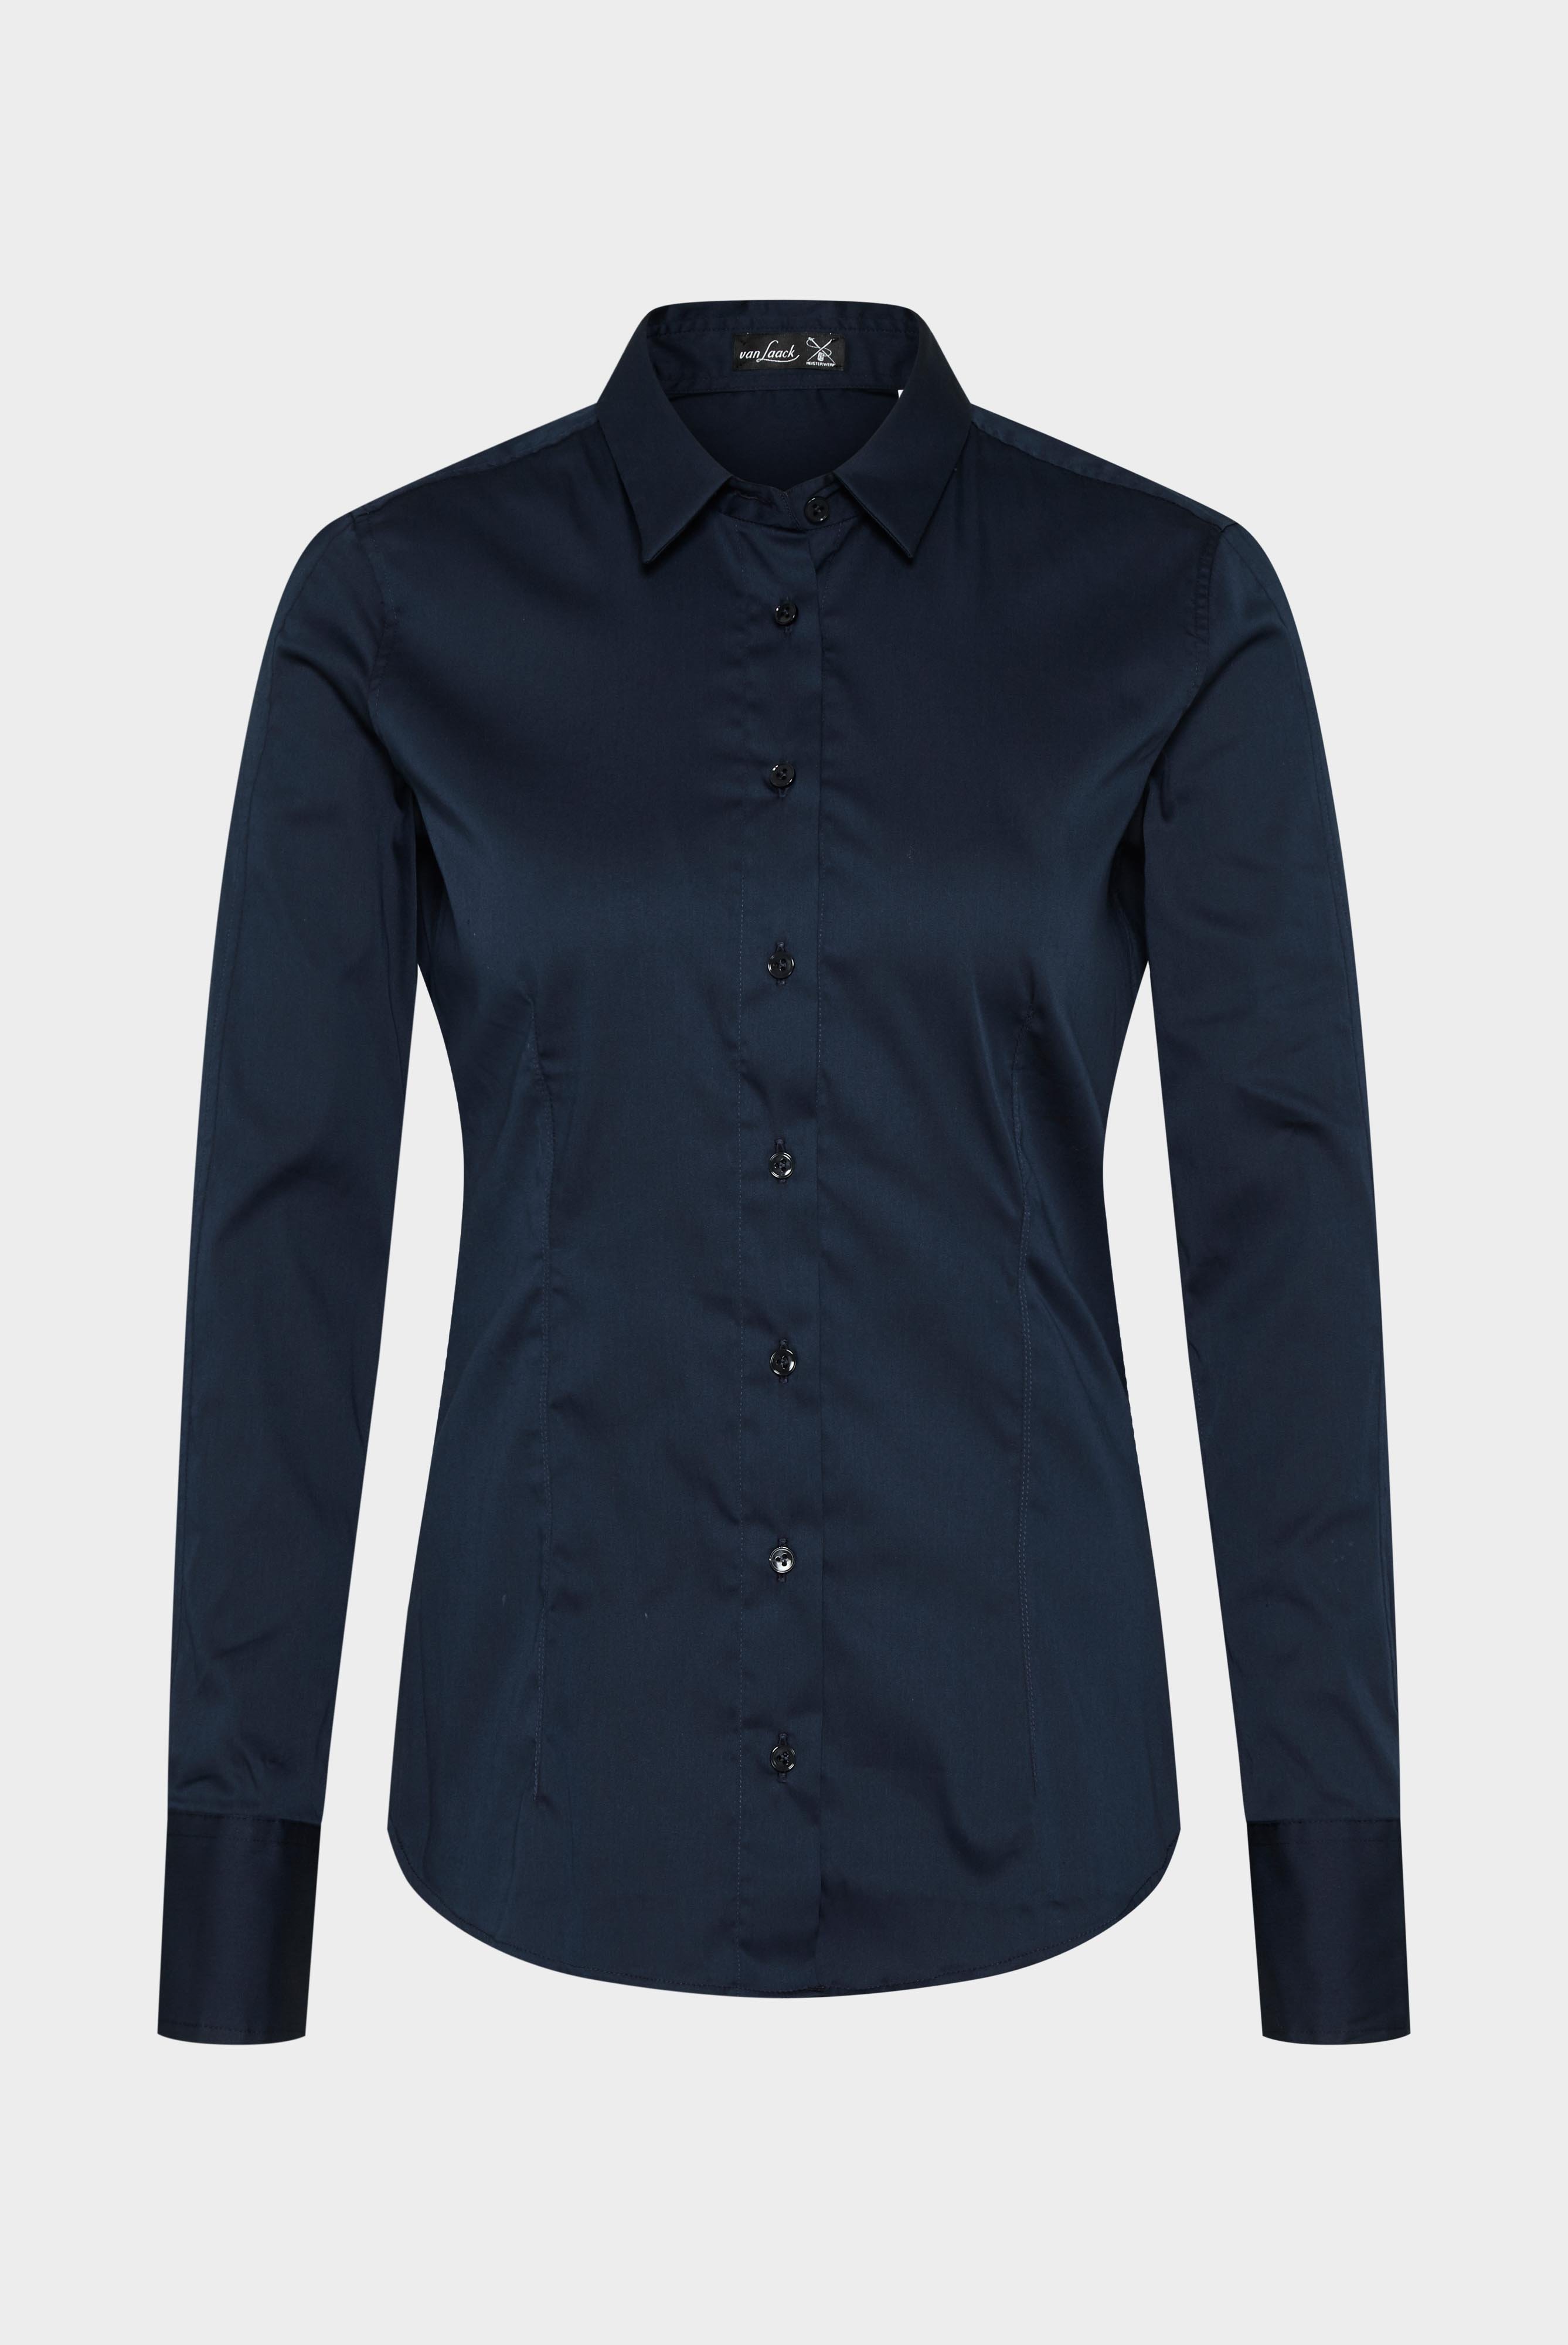 Business Blouses+Shirt Blouse with Stretch Slim Fit+05.5845.73.130830.780.48